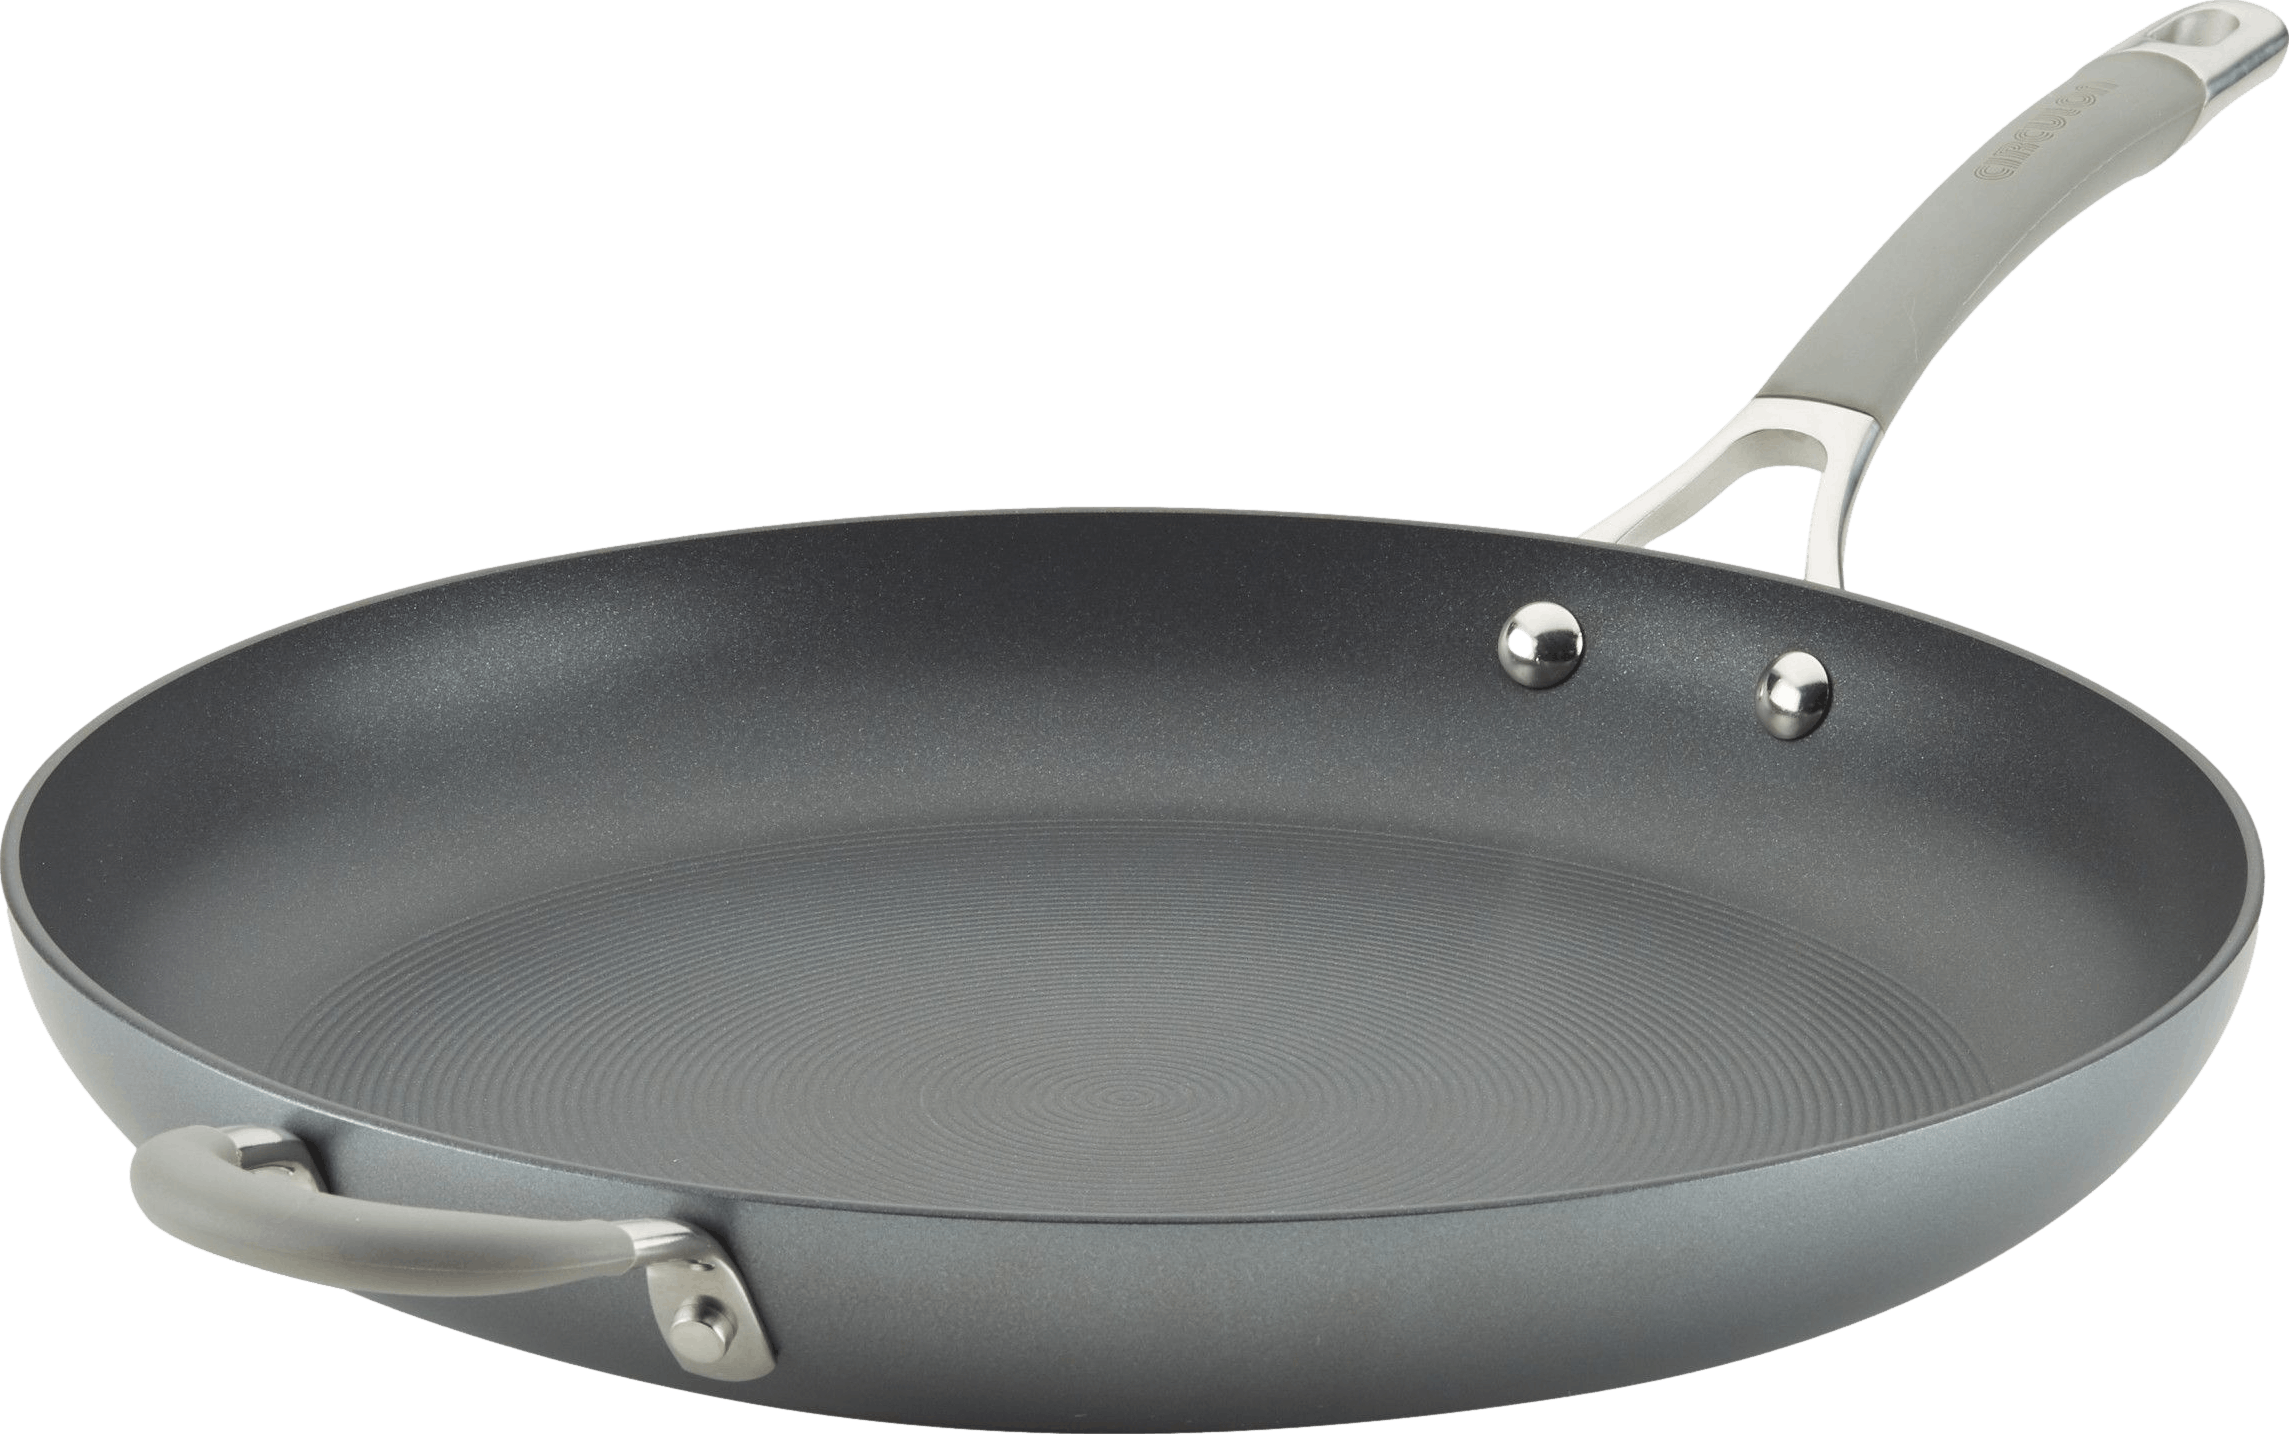 Anolon Advanced Hard Anodized Nonstick Frying Pan with Helper Handle, 14- Inch, Gray 